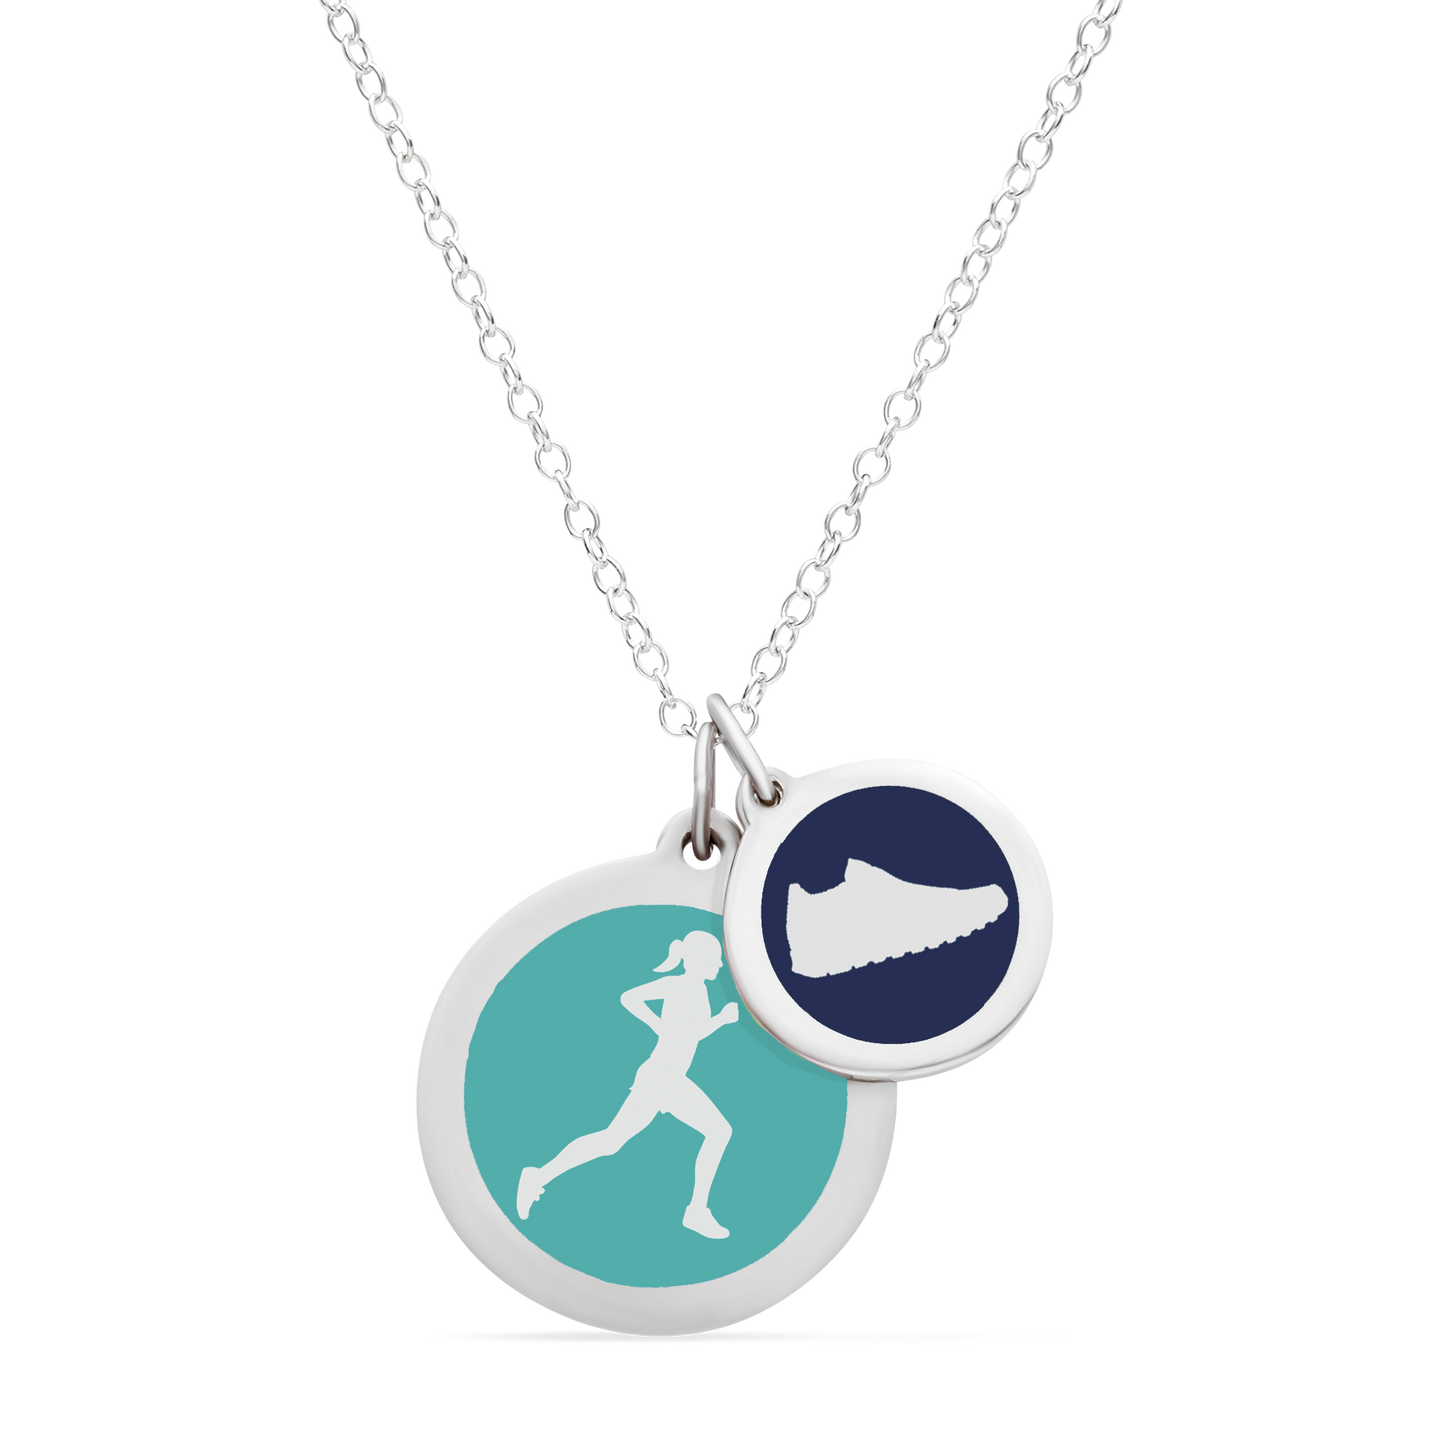 RUNNER & SNEAKER NECKLACE in sterling silver with rhodium plate